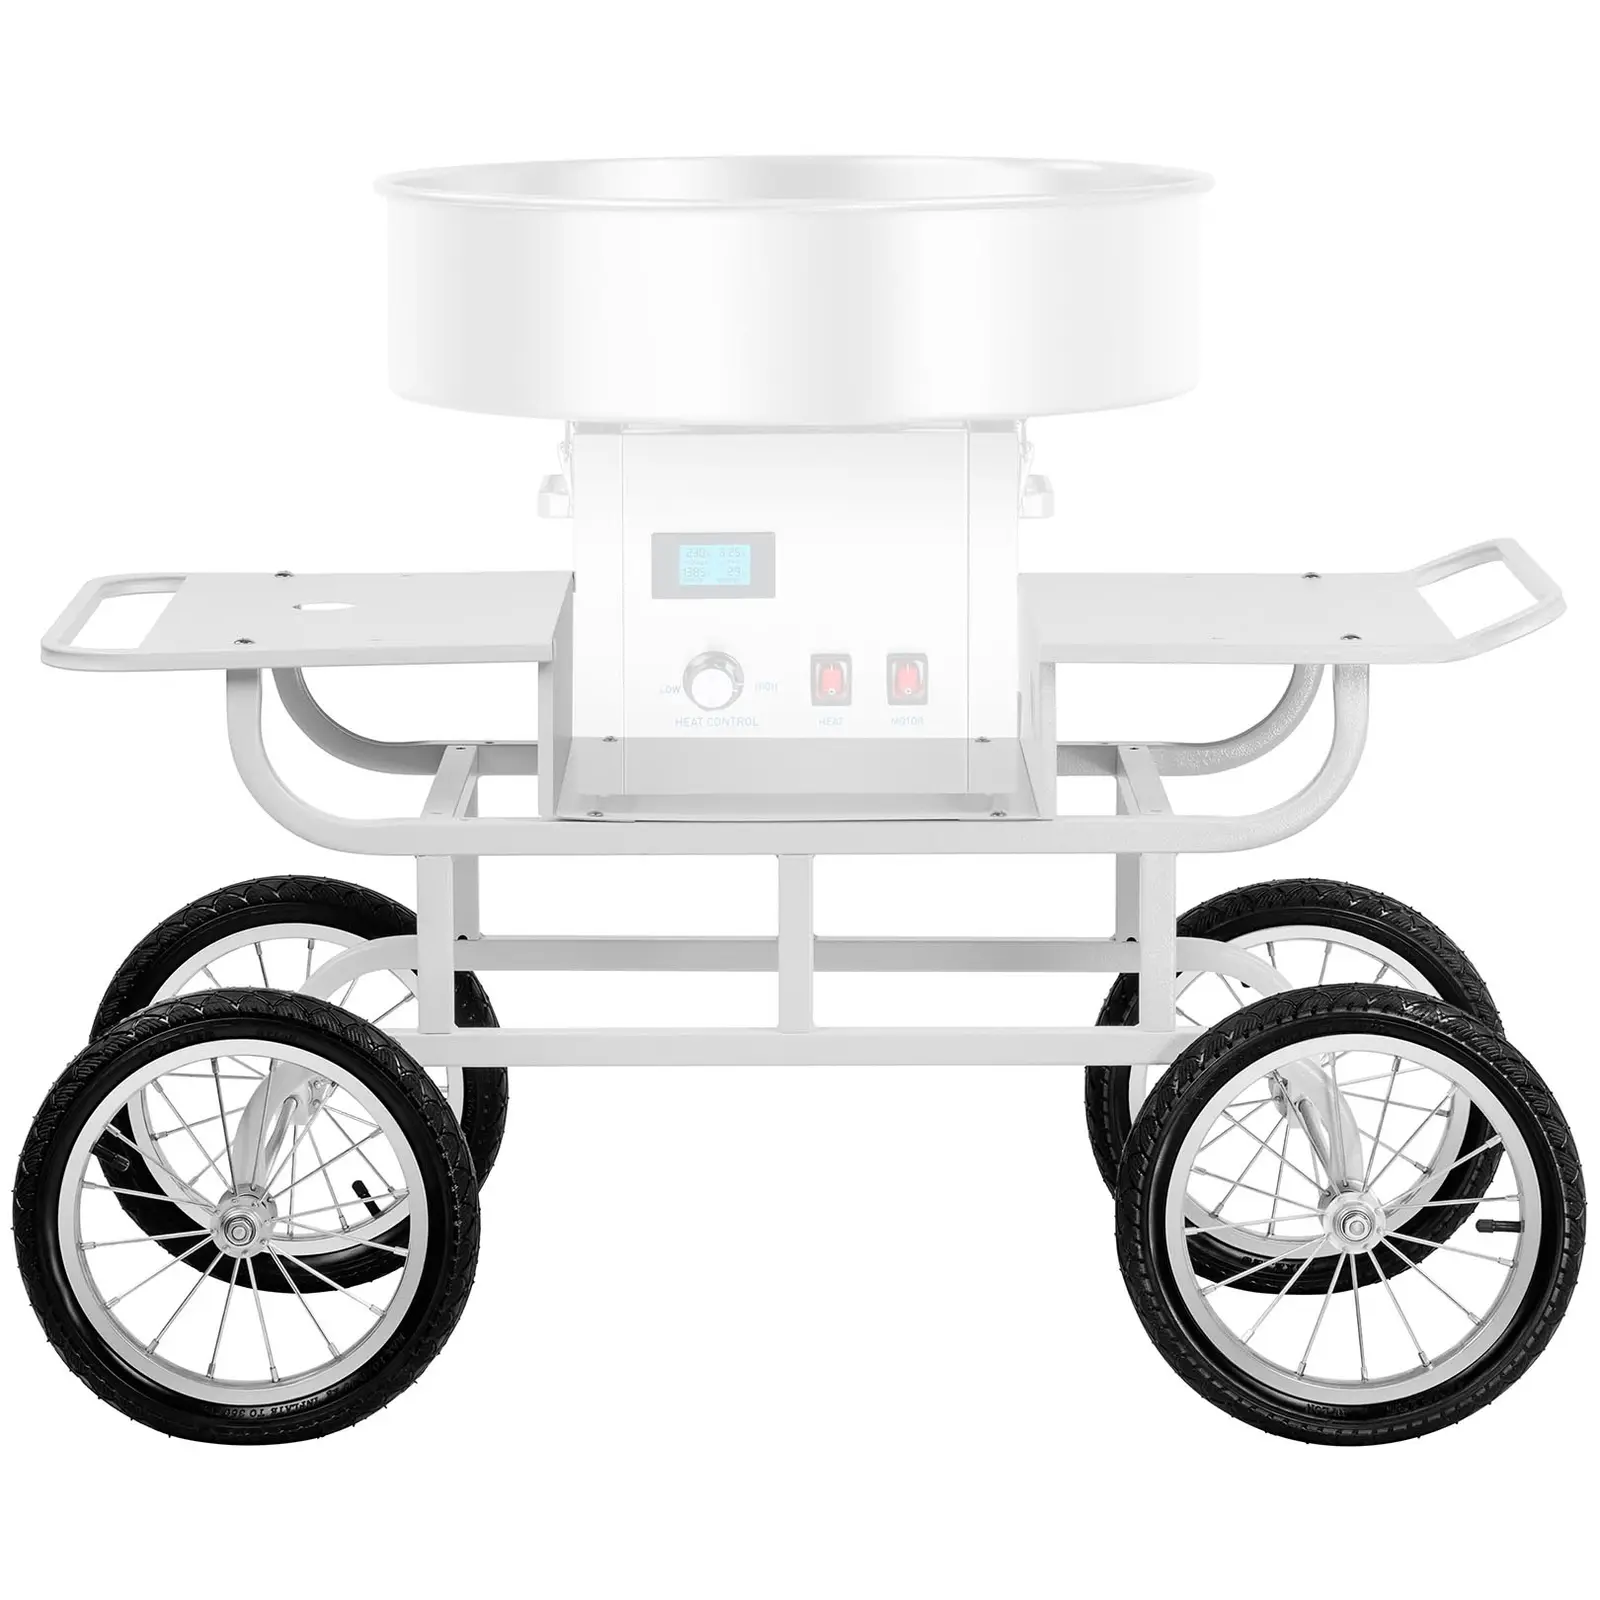 Trolley For Candy Floss Machine - 4 Wheels - White